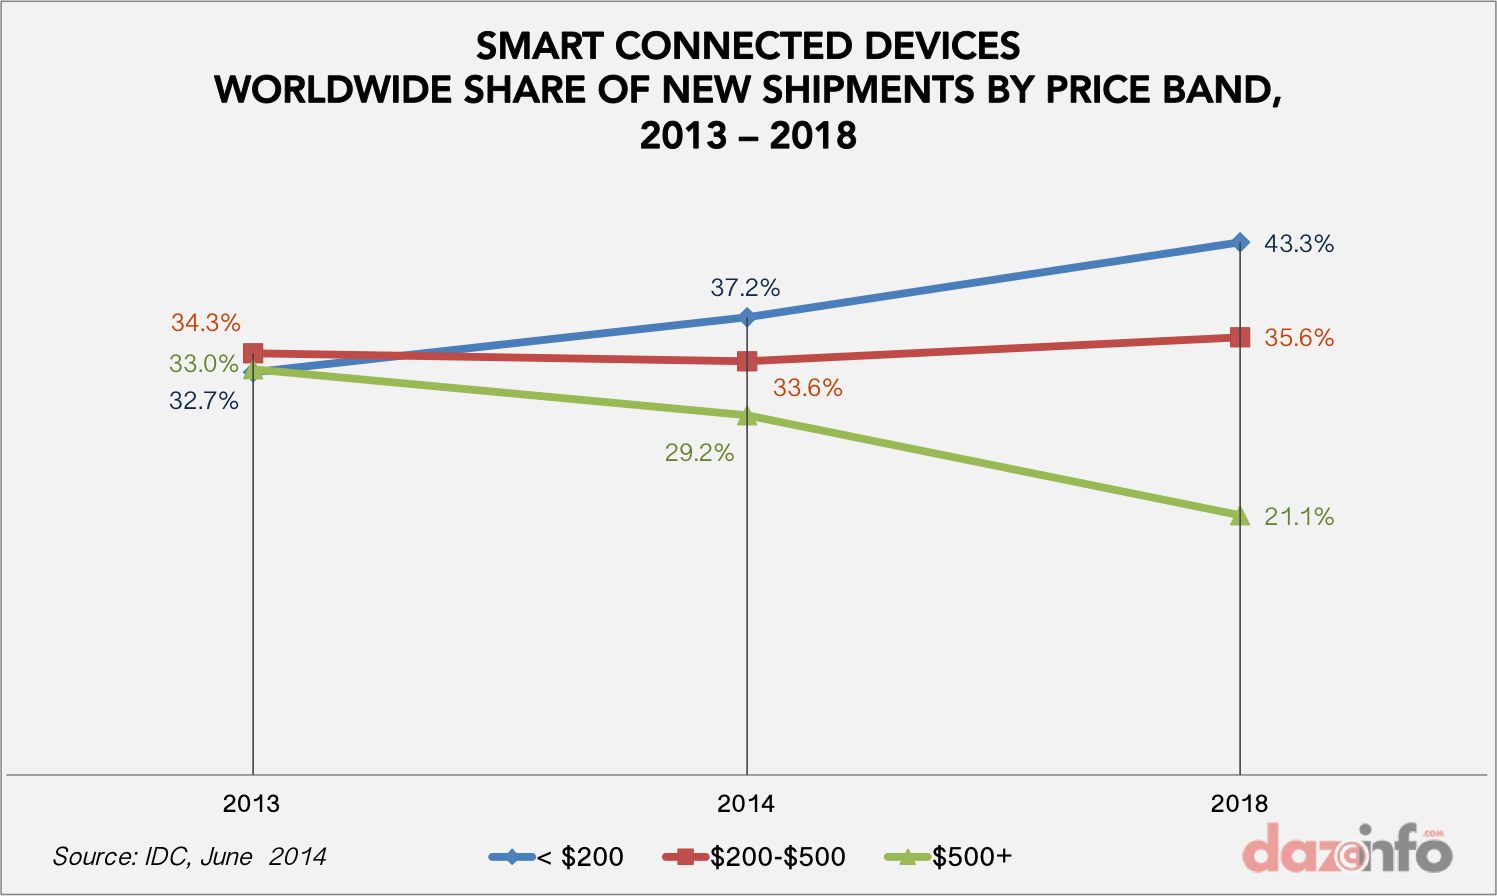 Smart connected devices market share by price 2014 - 2018